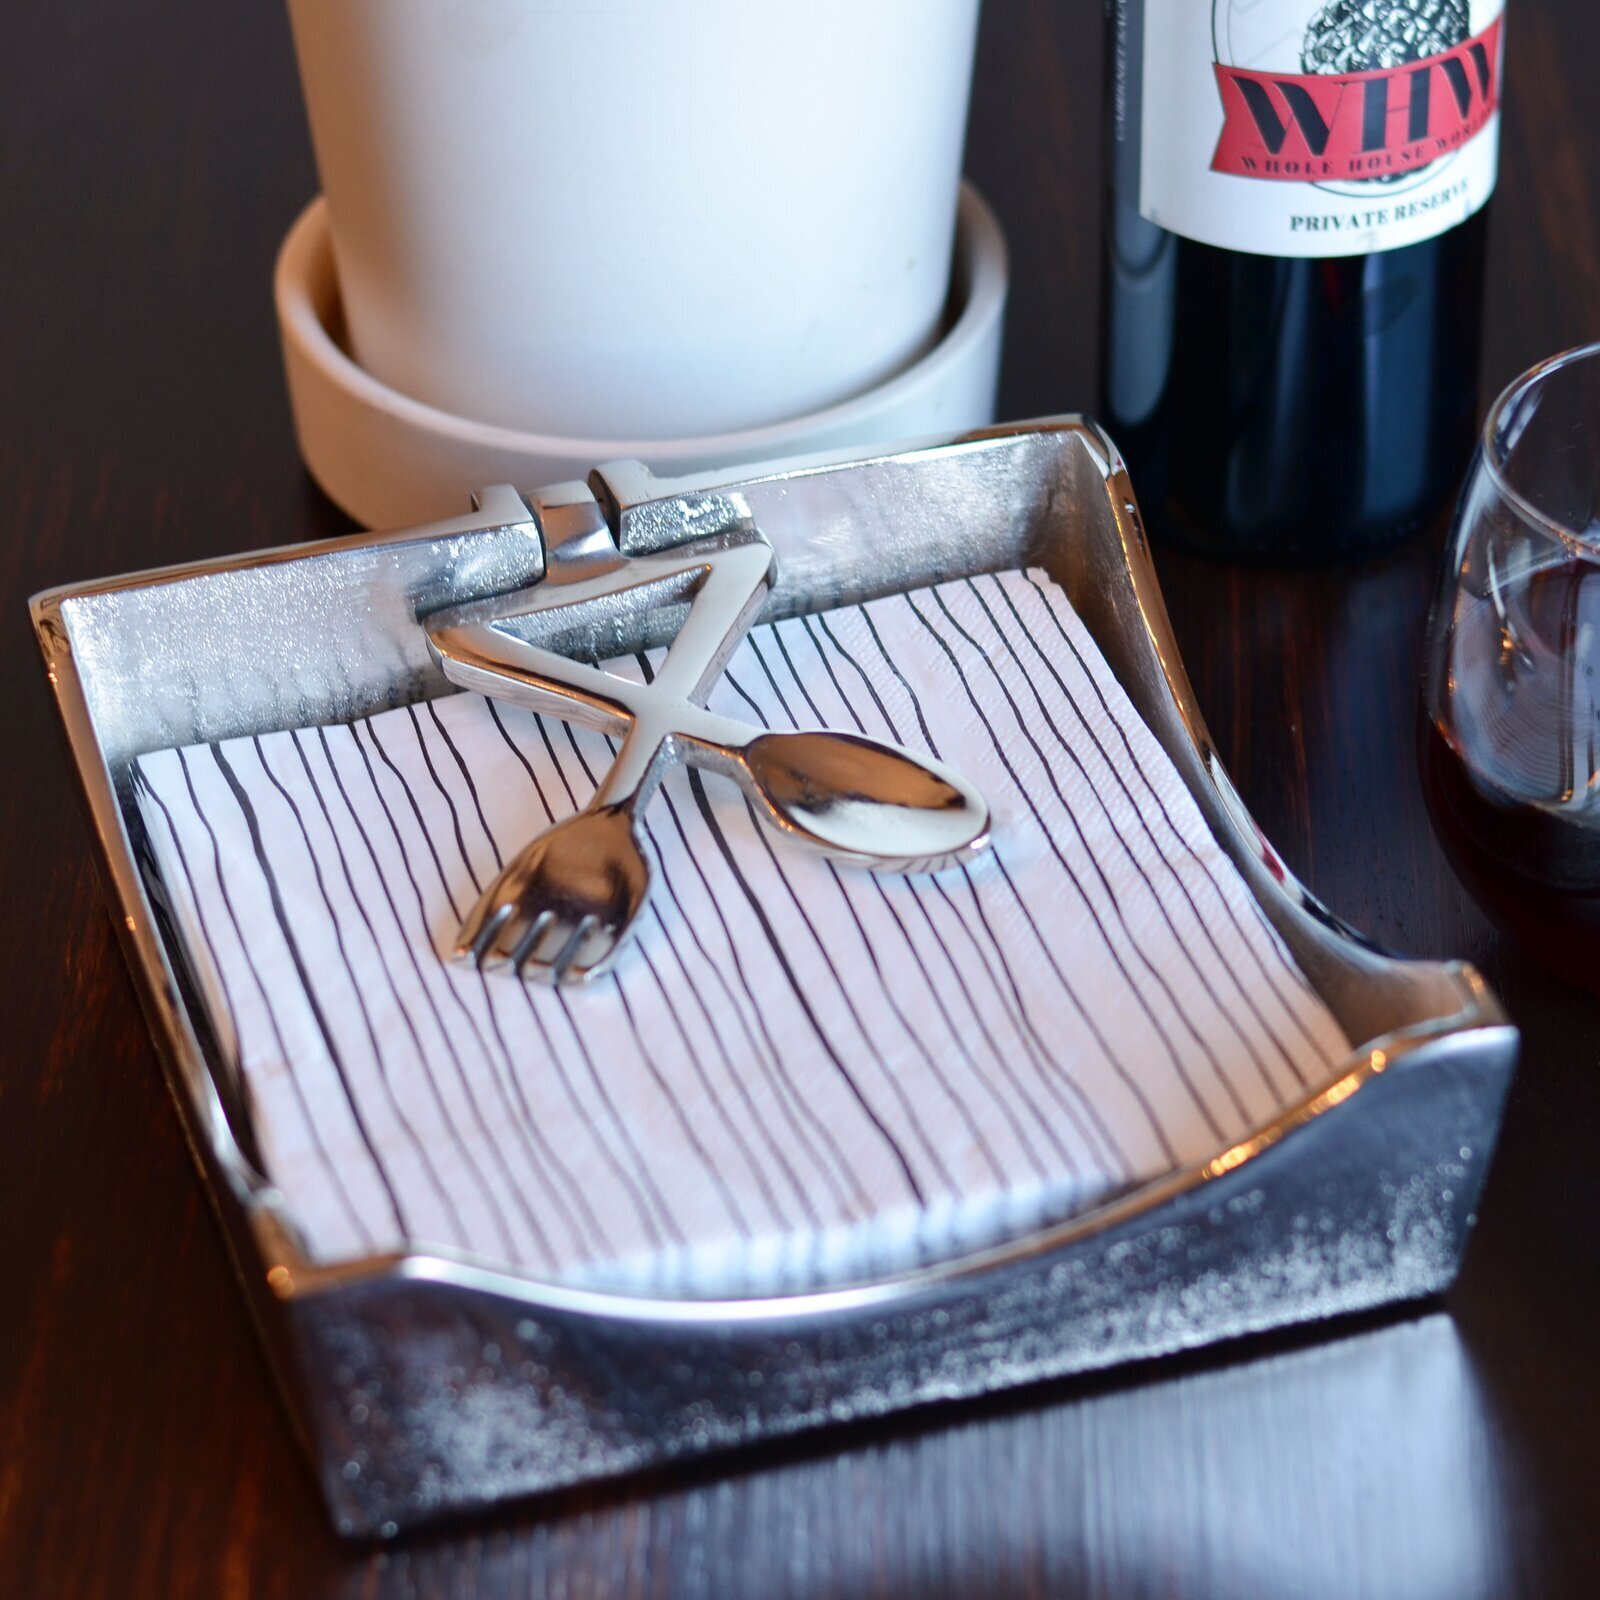 Napkin holder with weight and culinary inspiration